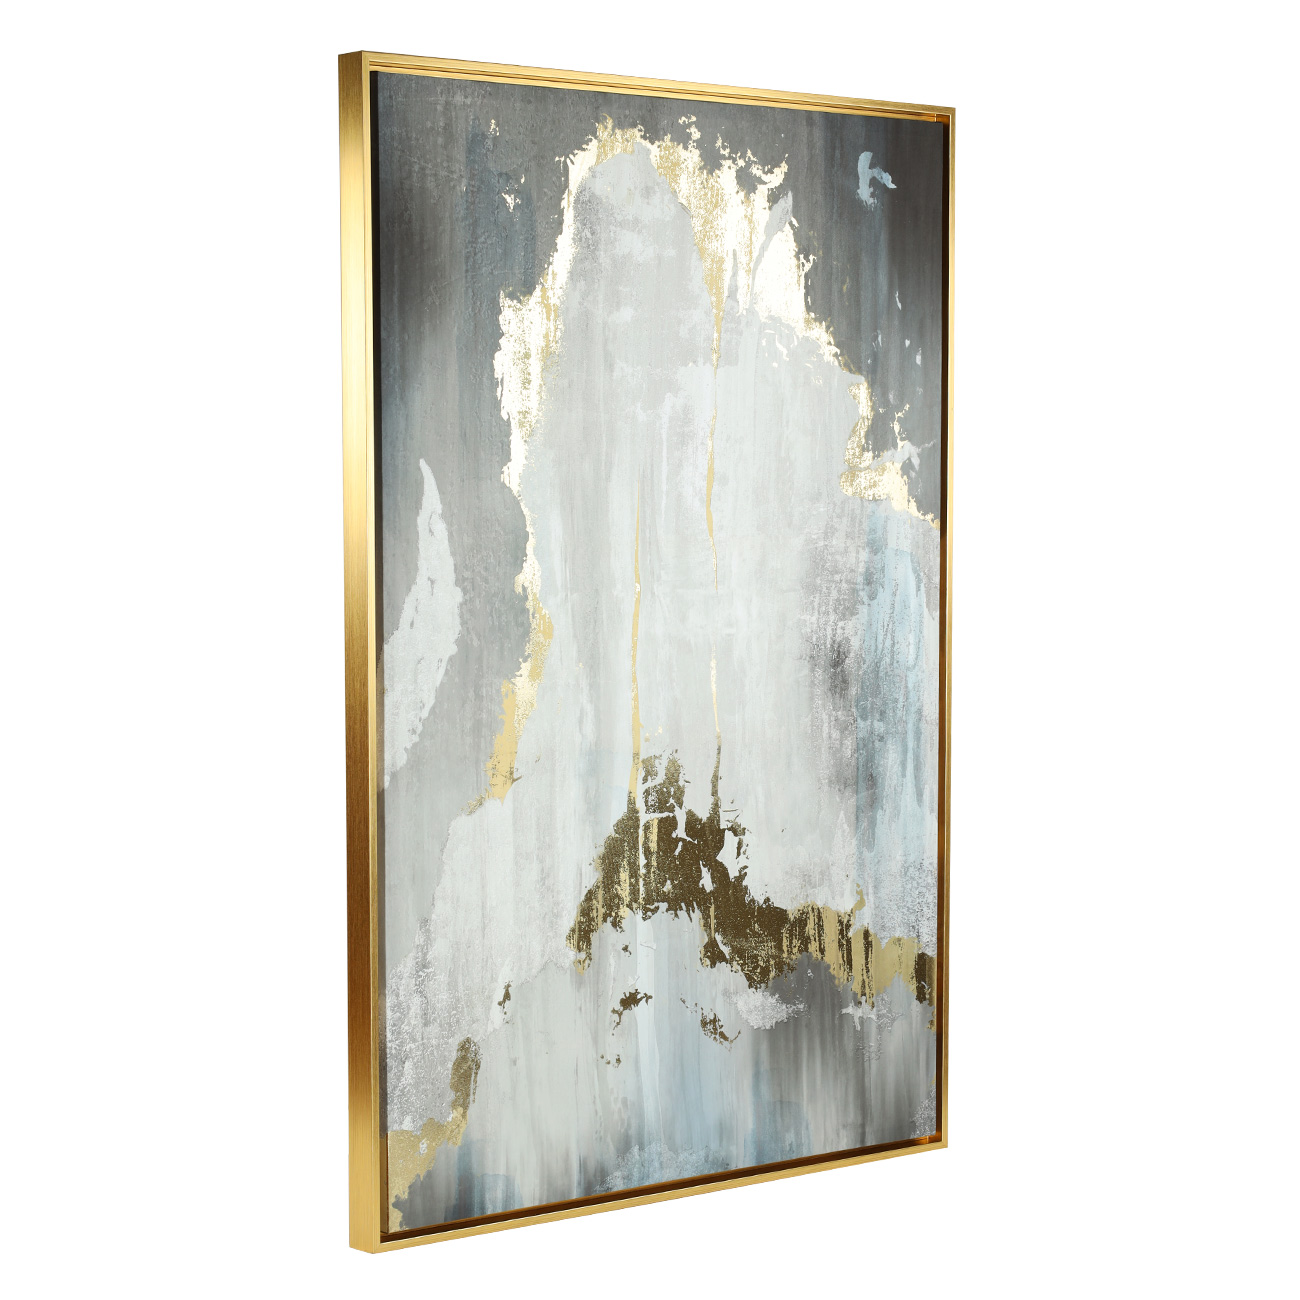 Framed painting, 80x120 cm, canvas / foil, golden gray, Abstract изображение № 3